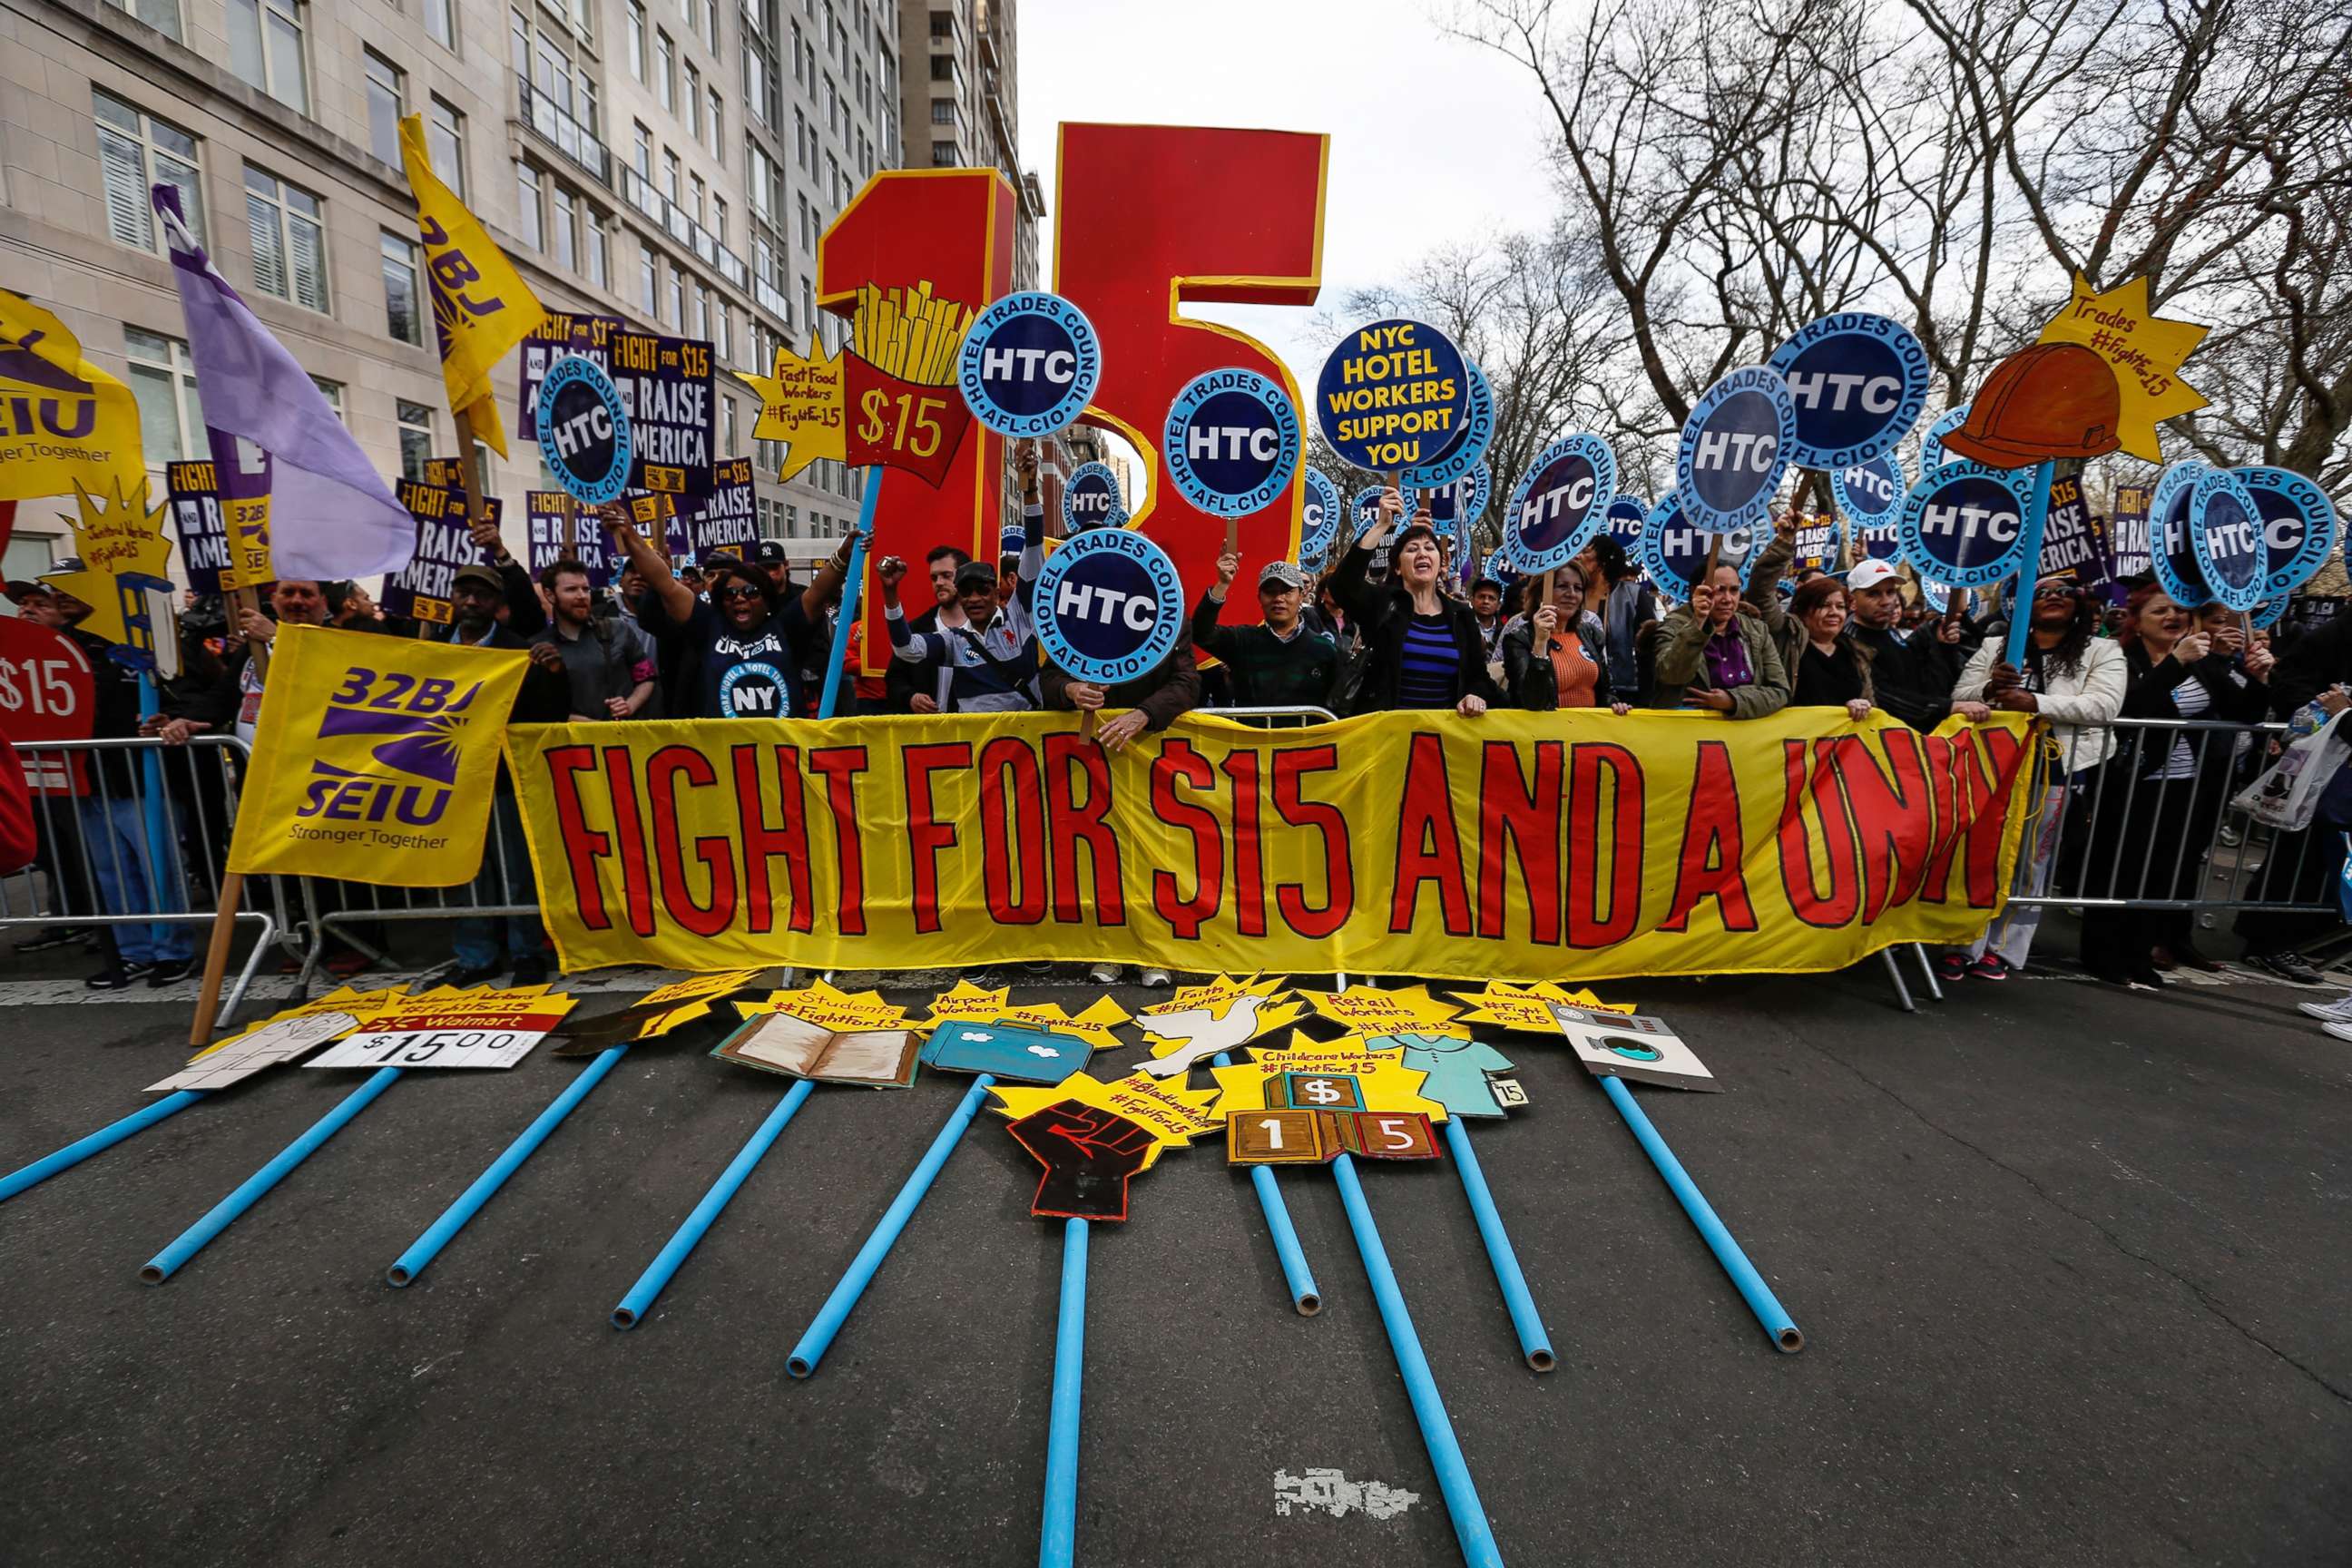 PHOTO: The national movement 'Fight For $15' including workers and labor unions march  demanding raise the minimum wage to $15/hour, at Colombus Square in New York, April 15, 2015.